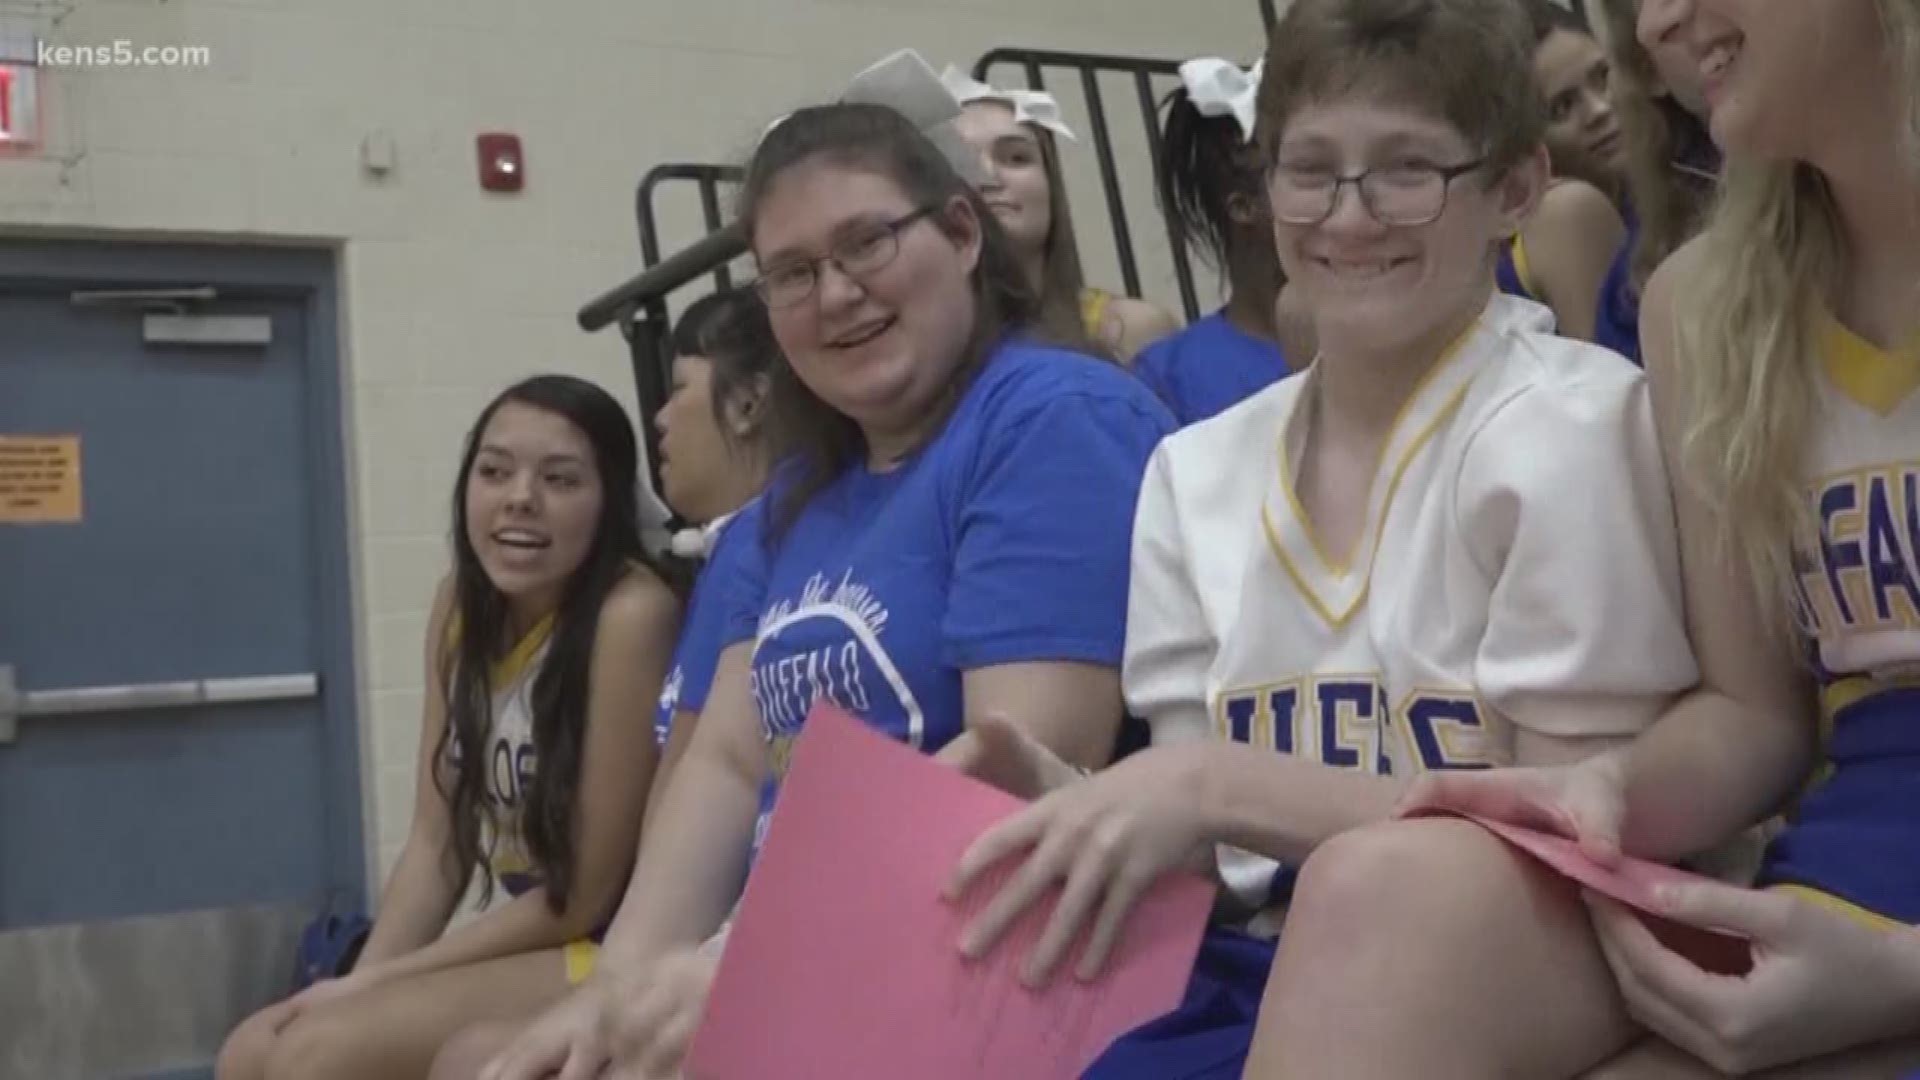 They're creating an all-inclusive campus with activities open to all students, including those with special needs. Eyewitness news reporter Vanessa Croix joins us now to explain what's happening at Clemens High School.